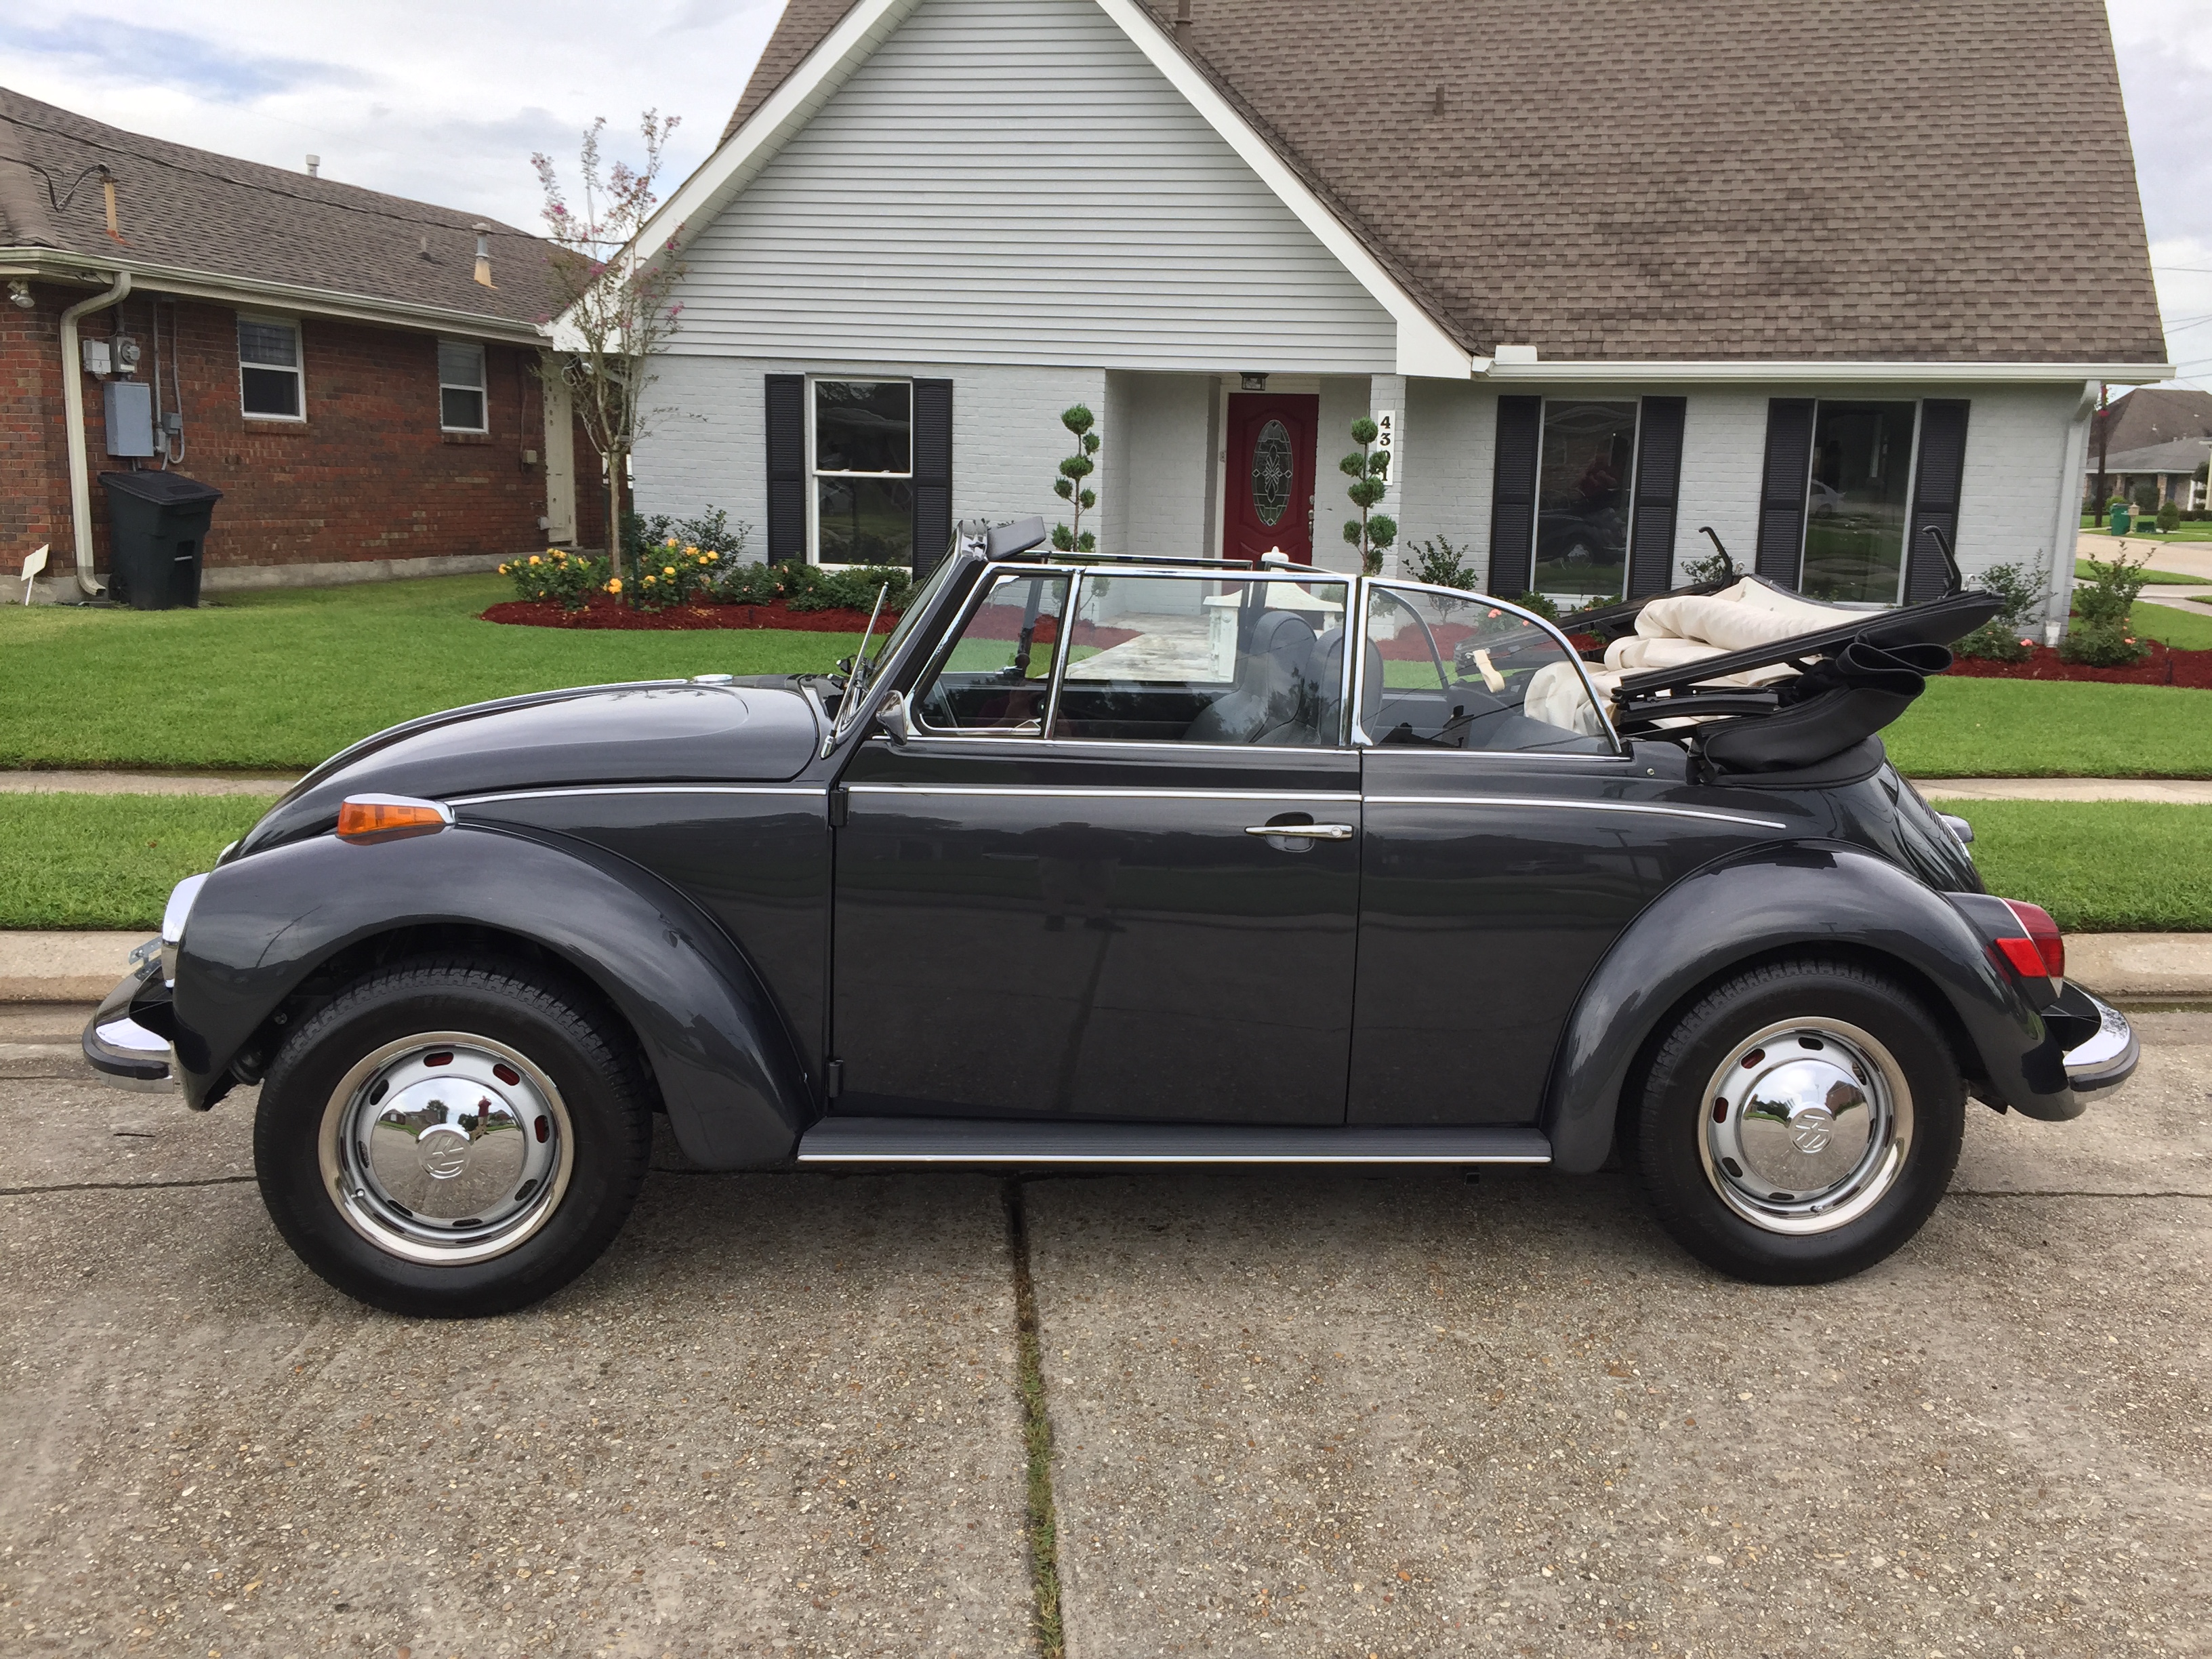 7th Image of a 1971 VOLKSWAGEN SUPER BEETLE